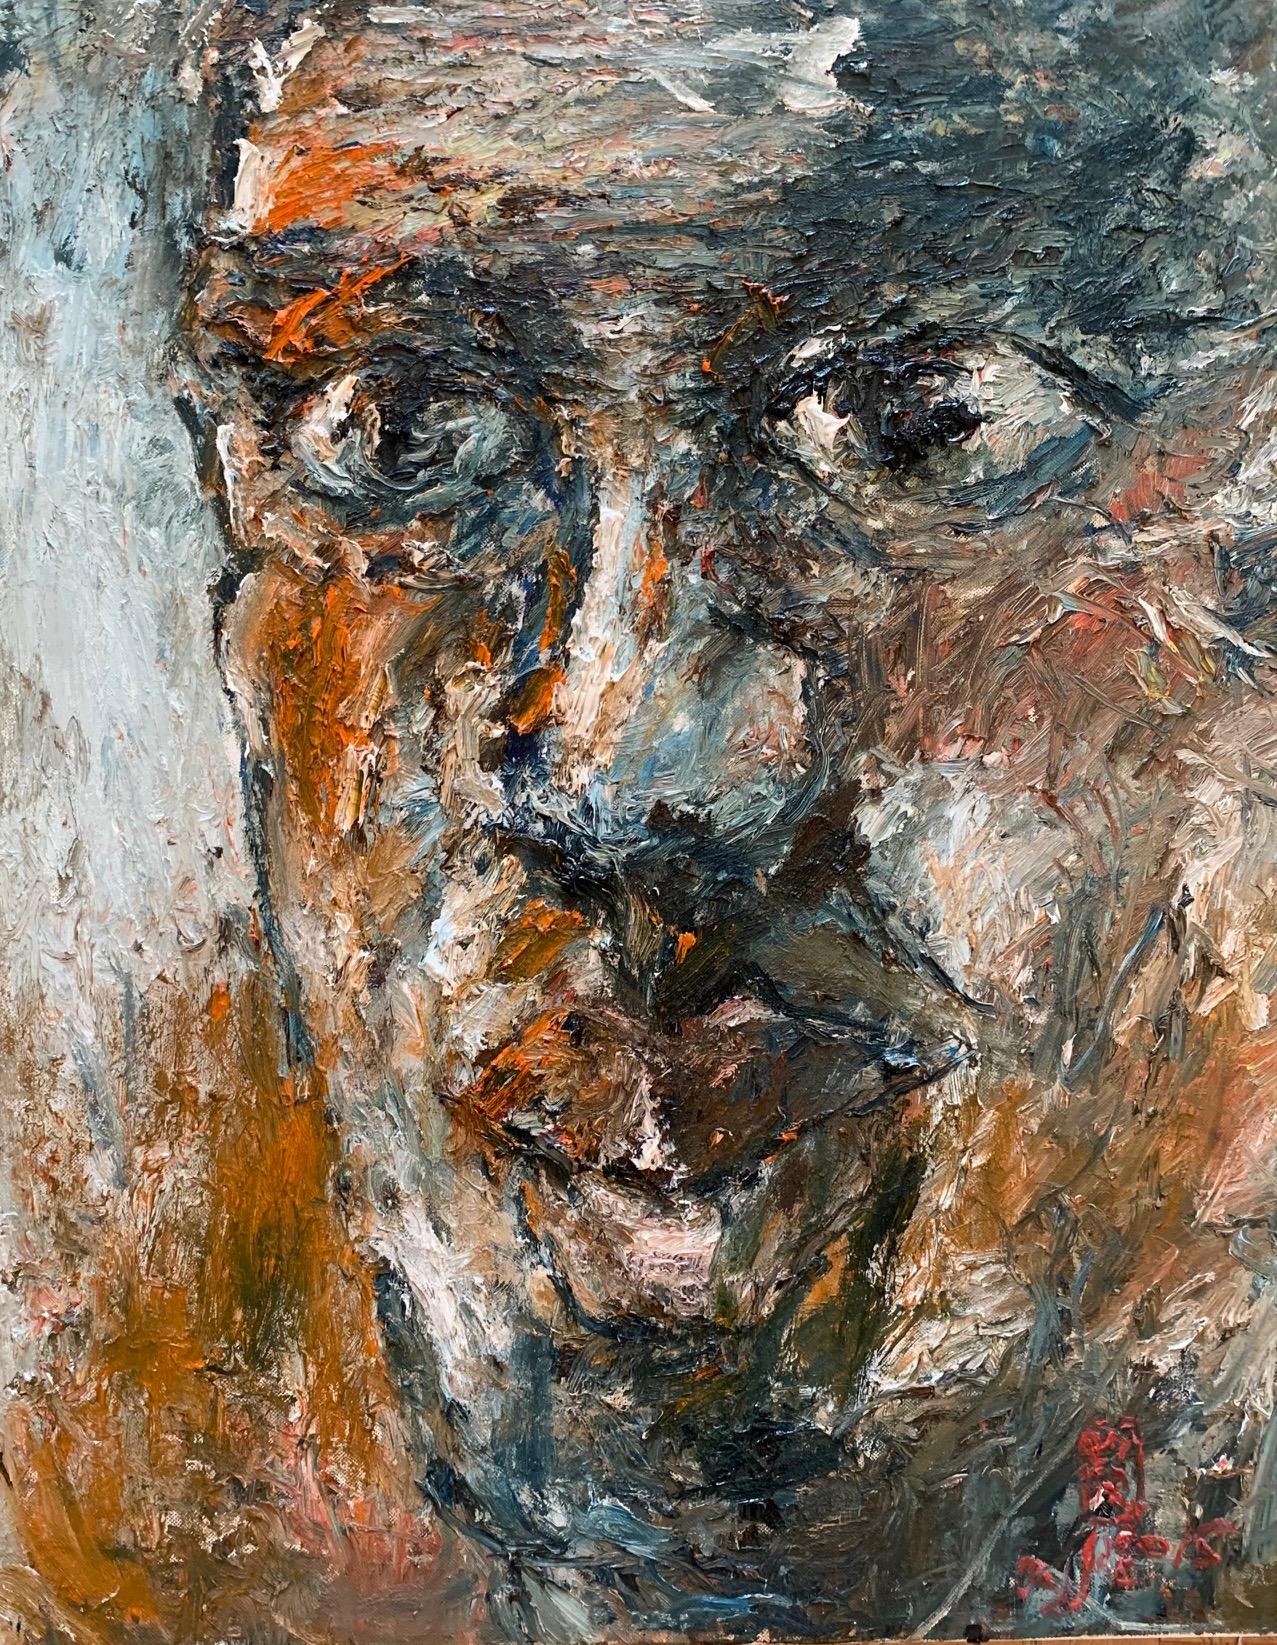 Duan Zhaonan Figurative Painting - ‘Father Series No. 8' Portrait Oil Painting Contemporary Textured Art by Duan